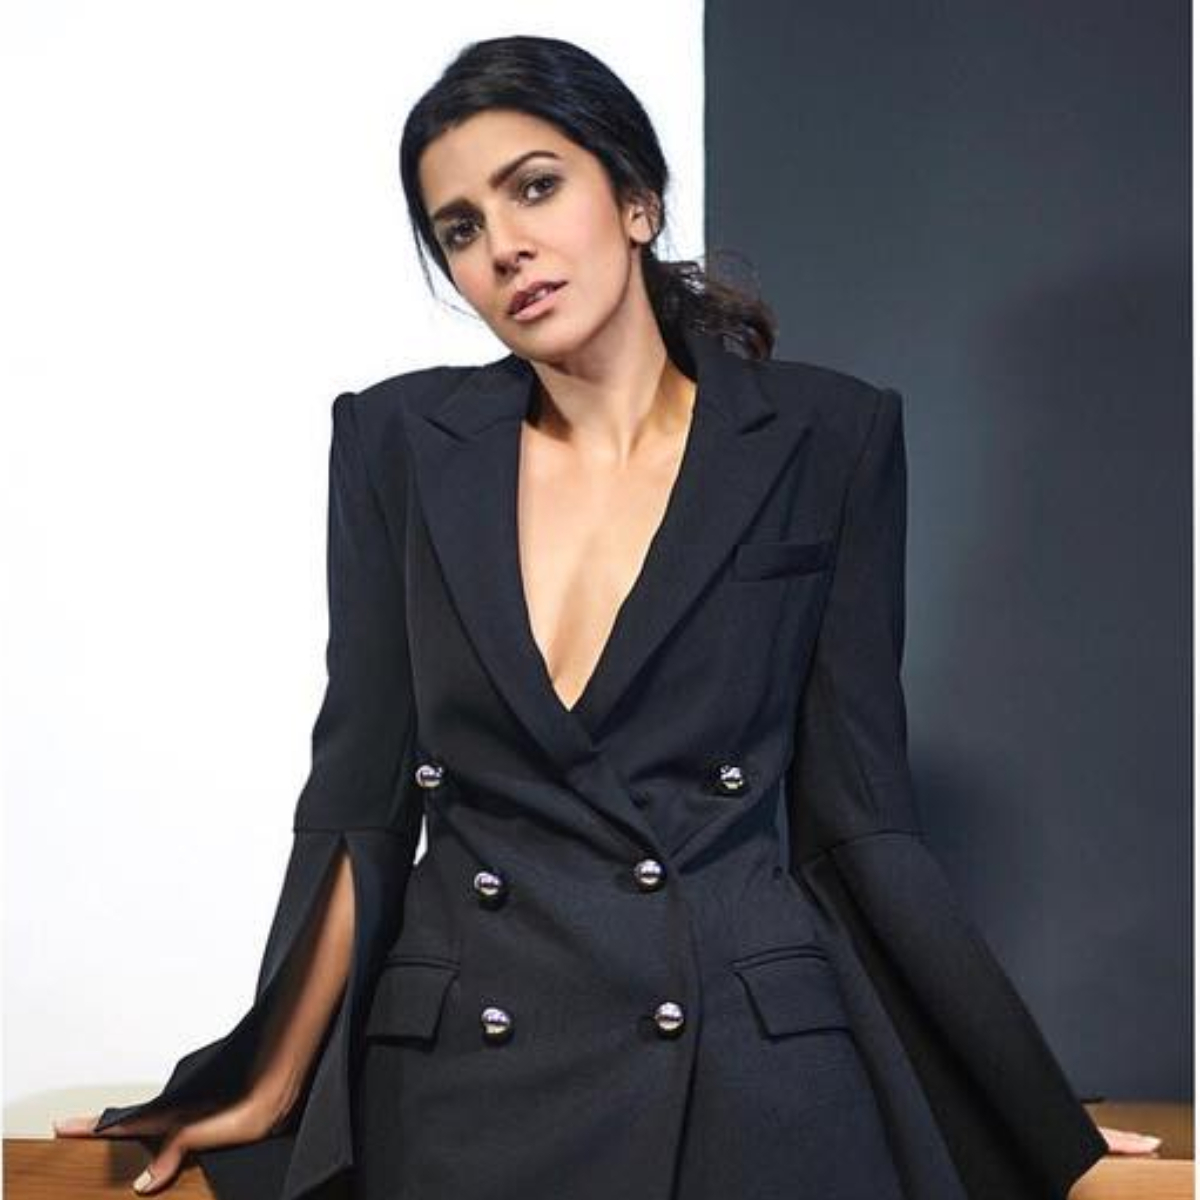 EXCLUSIVE: Nimrat Kaur gets candid about her struggles: People felt I looked too modern, didn't look homely